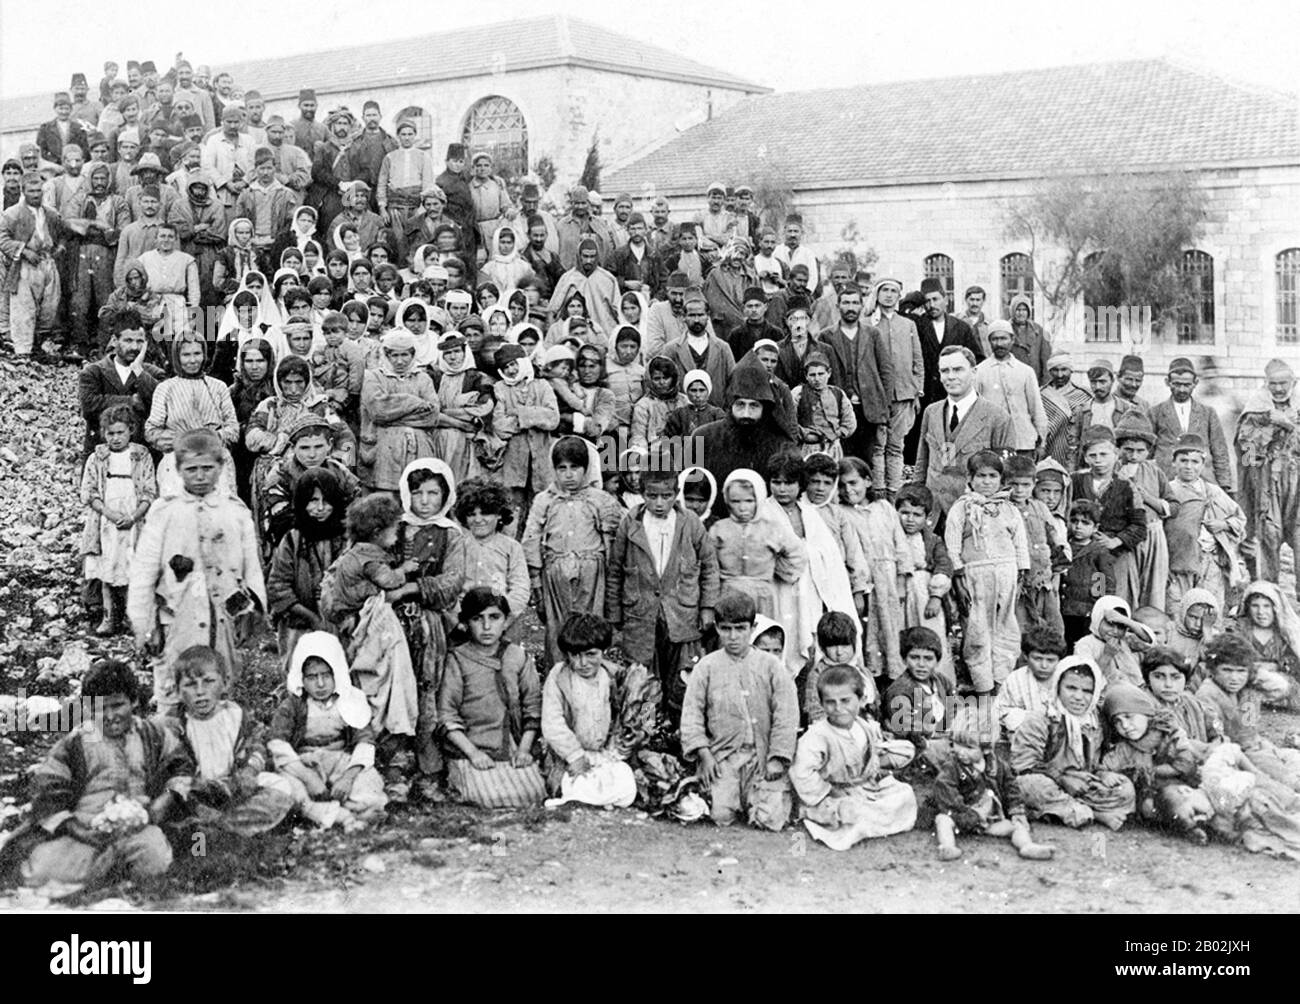 The Armenian Genocide refers to the deliberate and systematic destruction of the Armenian population of the Ottoman Empire during and just after World War I. It was implemented through wholesale massacres and deportations, with the deportations consisting of forced marches under conditions designed to lead to the death of the deportees. The total number of resulting Armenian deaths is generally held to have been between one and one and a half million.   Other ethnic groups were similarly attacked by the Ottoman Empire during this period, including Assyrians and Greeks, and some scholars consid Stock Photo